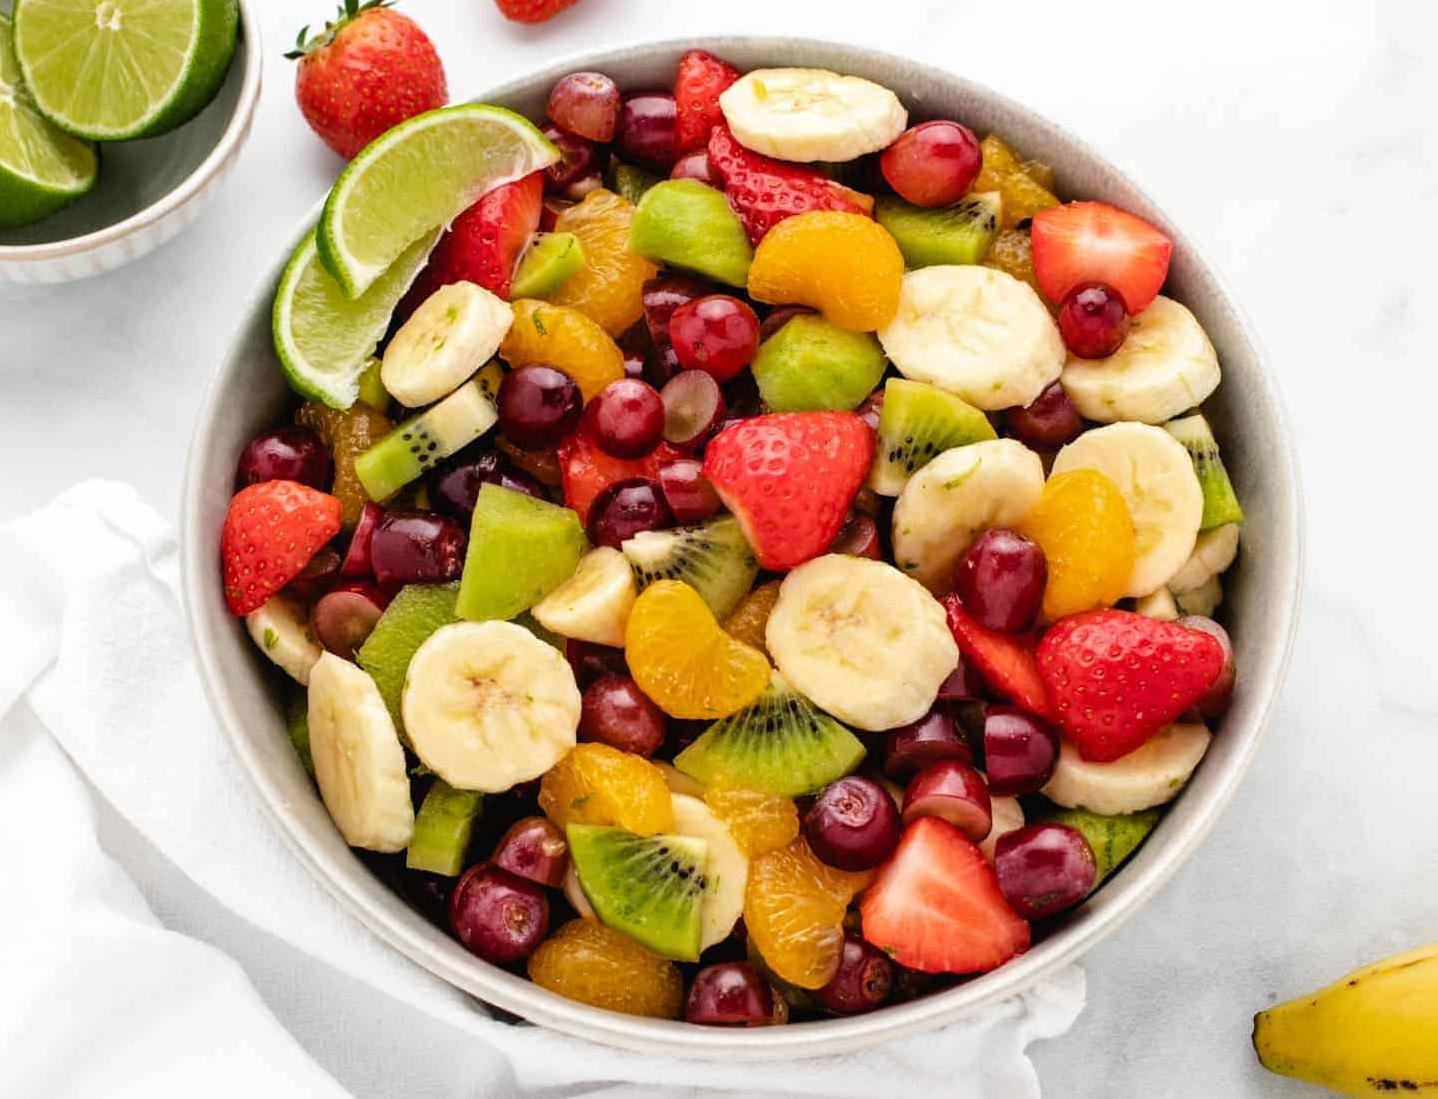  Just one bite of this Palm Springs fruit salad and you'll feel like you're lounging next to a pool.